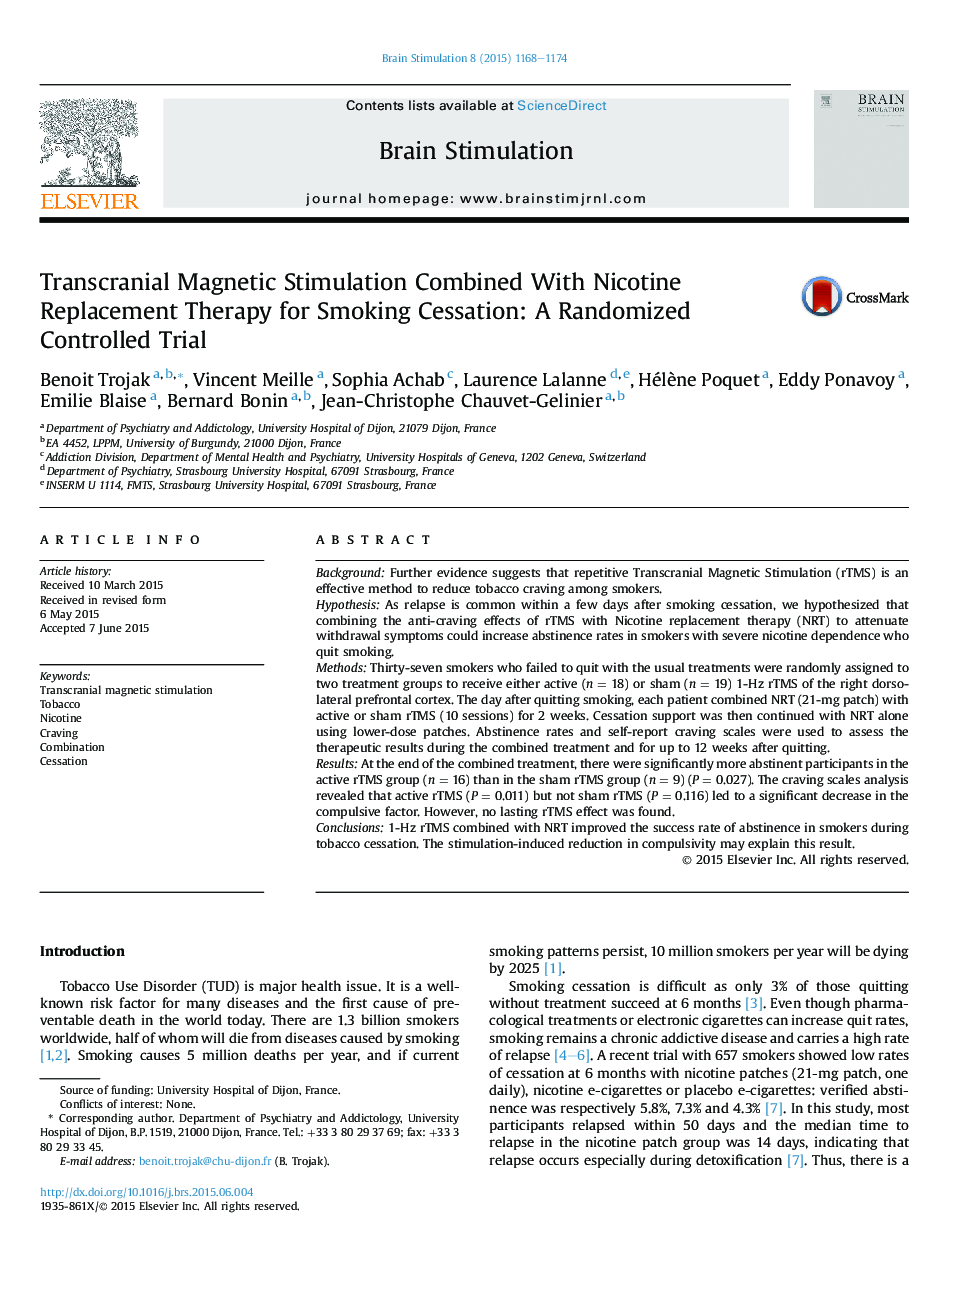 Transcranial Magnetic Stimulation Combined With Nicotine Replacement Therapy for Smoking Cessation: A Randomized Controlled Trial